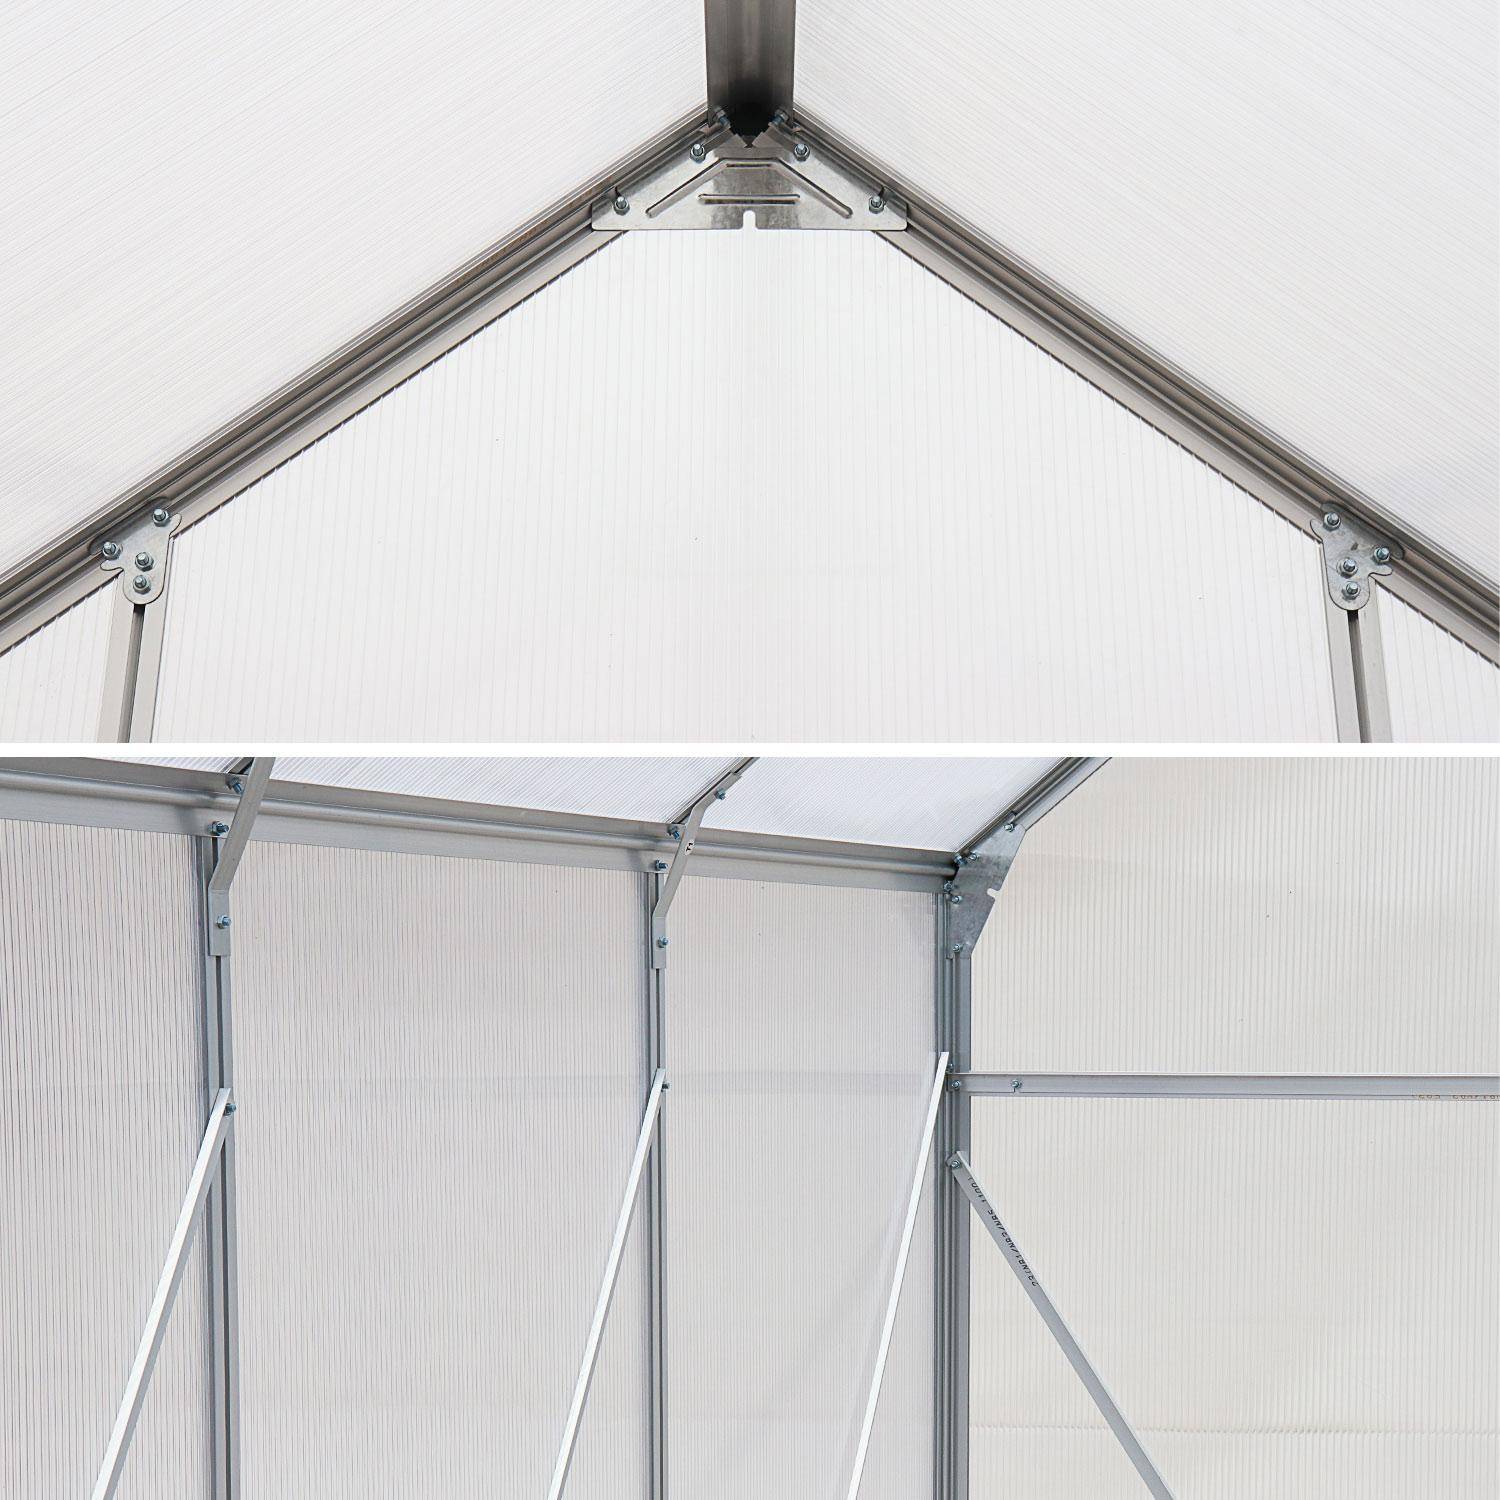 7m², 14x7FT polycarbonate (4mm) greenhouse with base frame - 2 skylights, gutter - Sapin - Grey Photo3